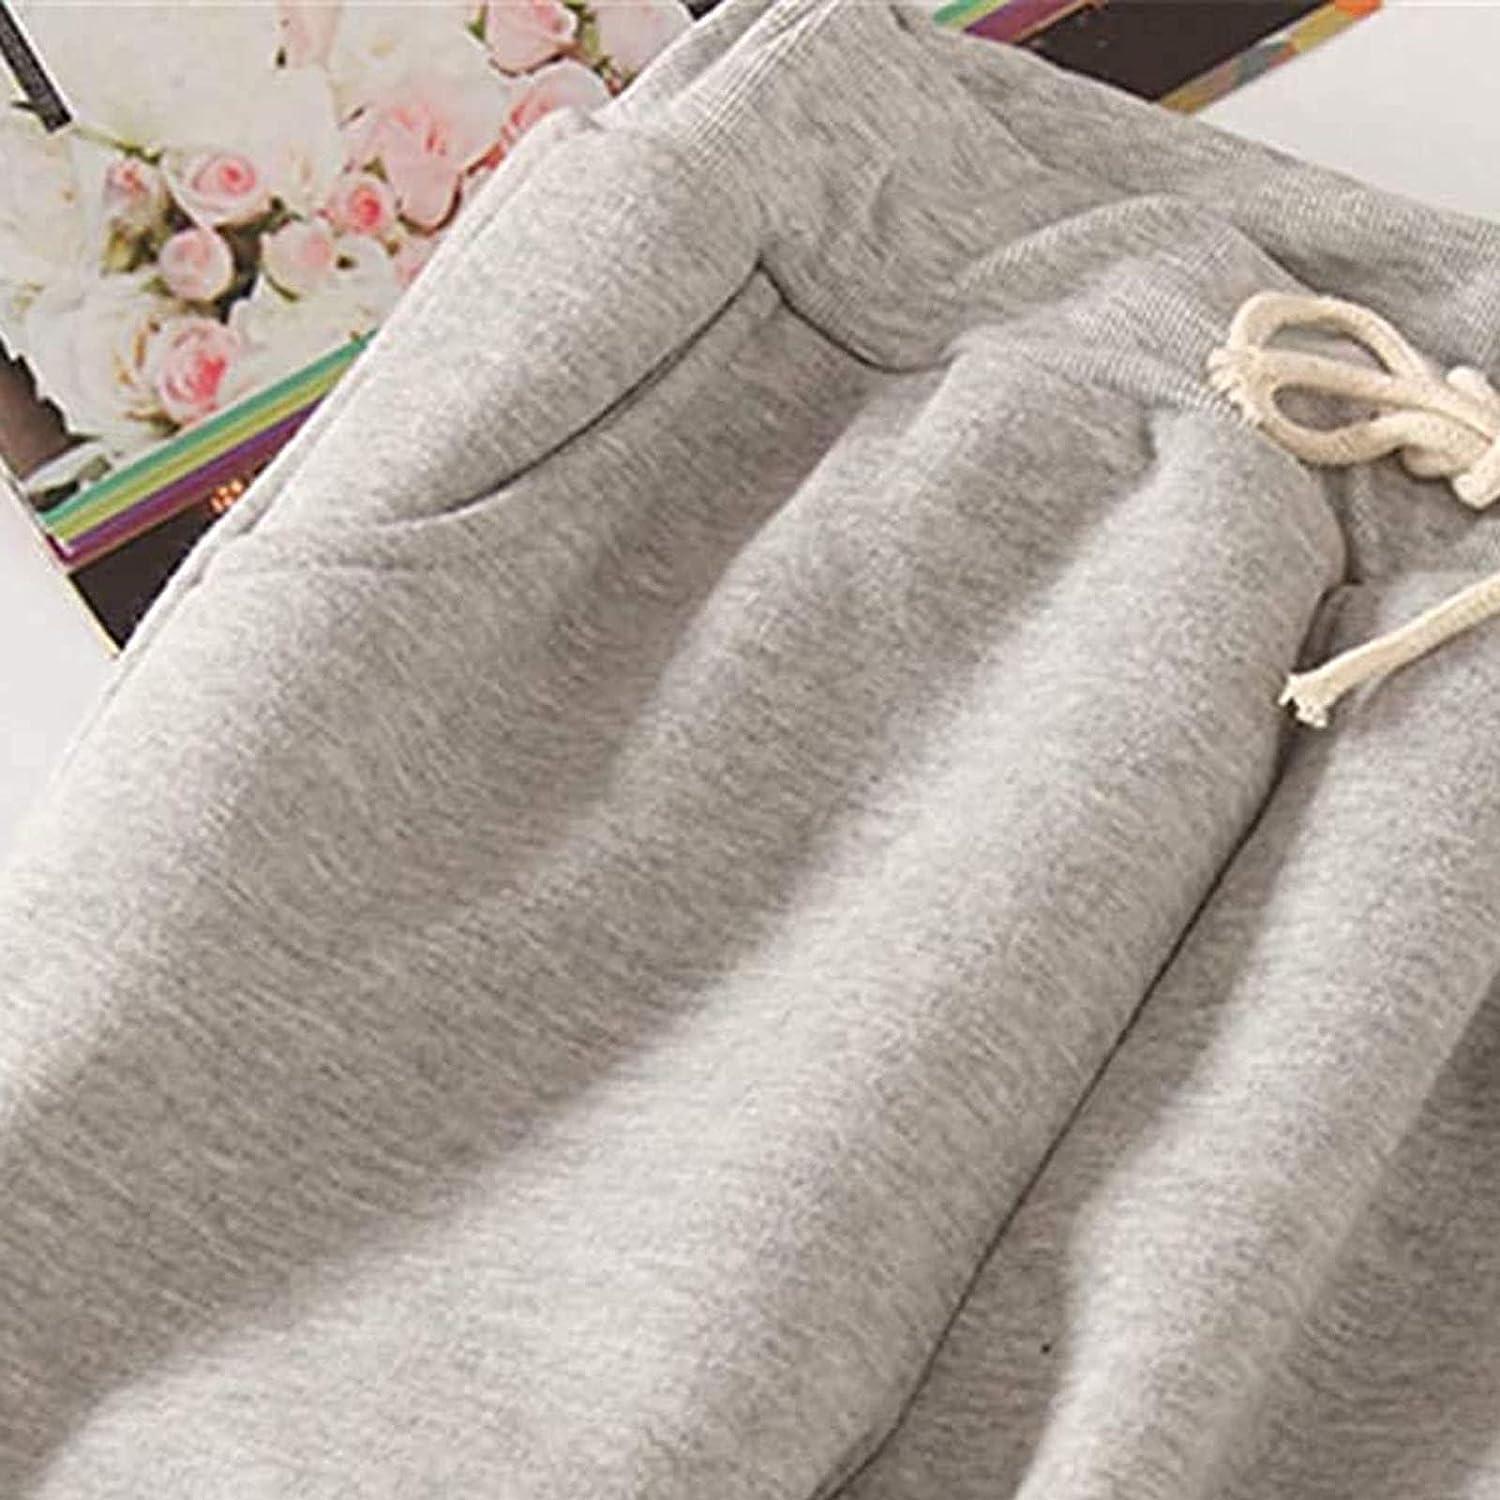 Women Mens Sherpa Lined Sweatpants Warm Fleece Drawstring Joggers Casual  Comfy Running Athletic Pants with Pockets 